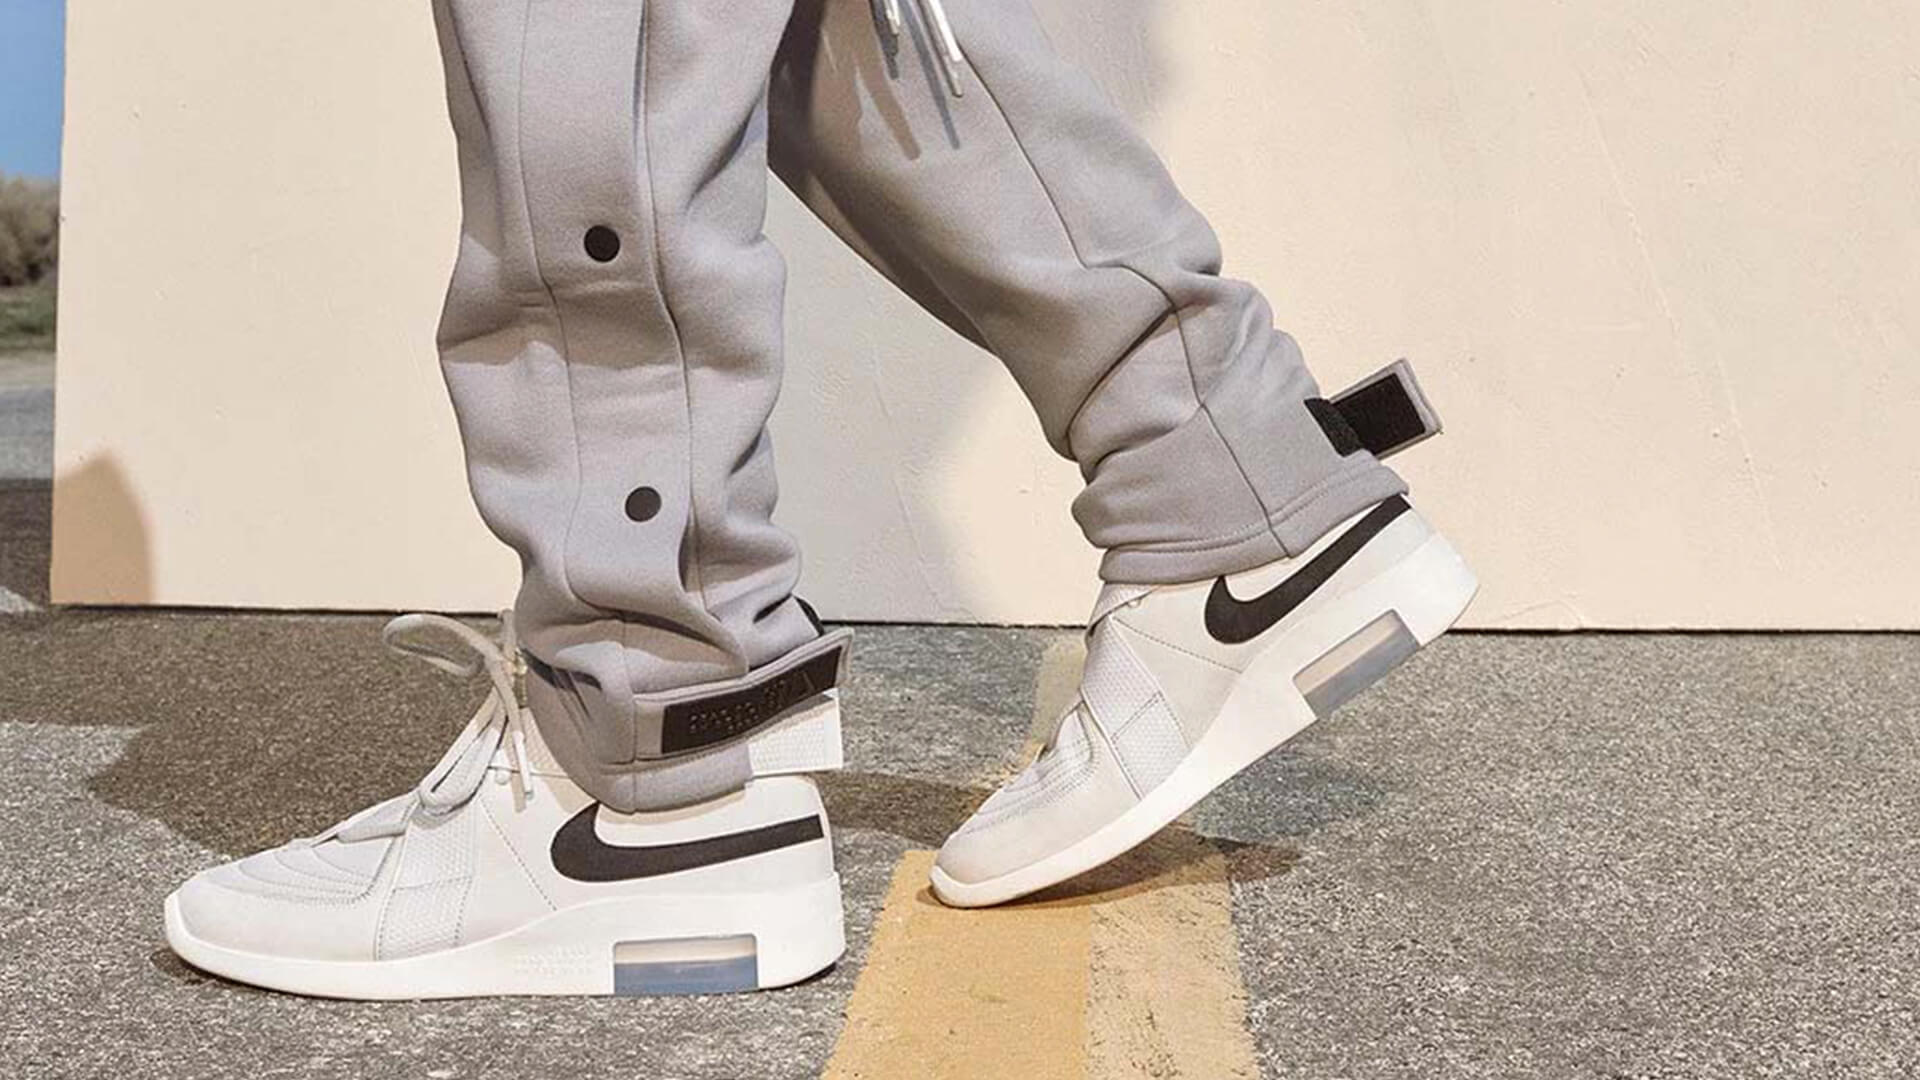 fear of god nike trainers